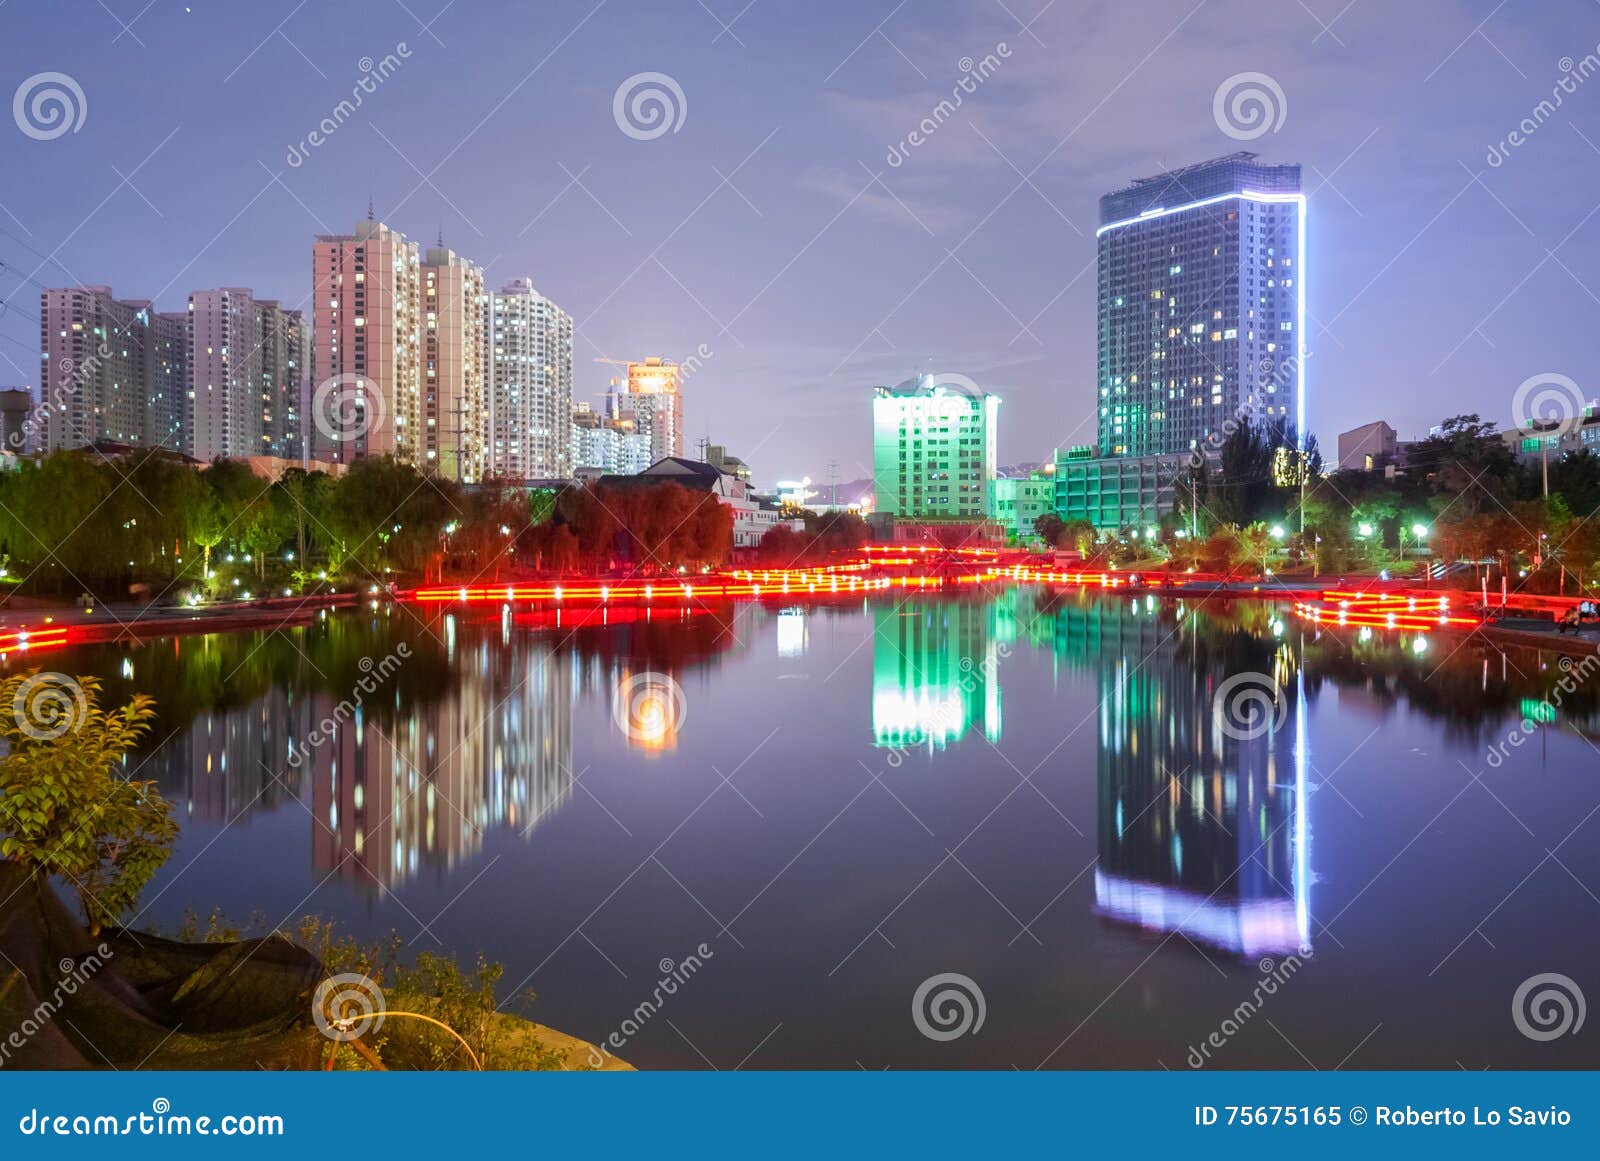 nocturne view of the lake in the yantan park in lanzhou (china)